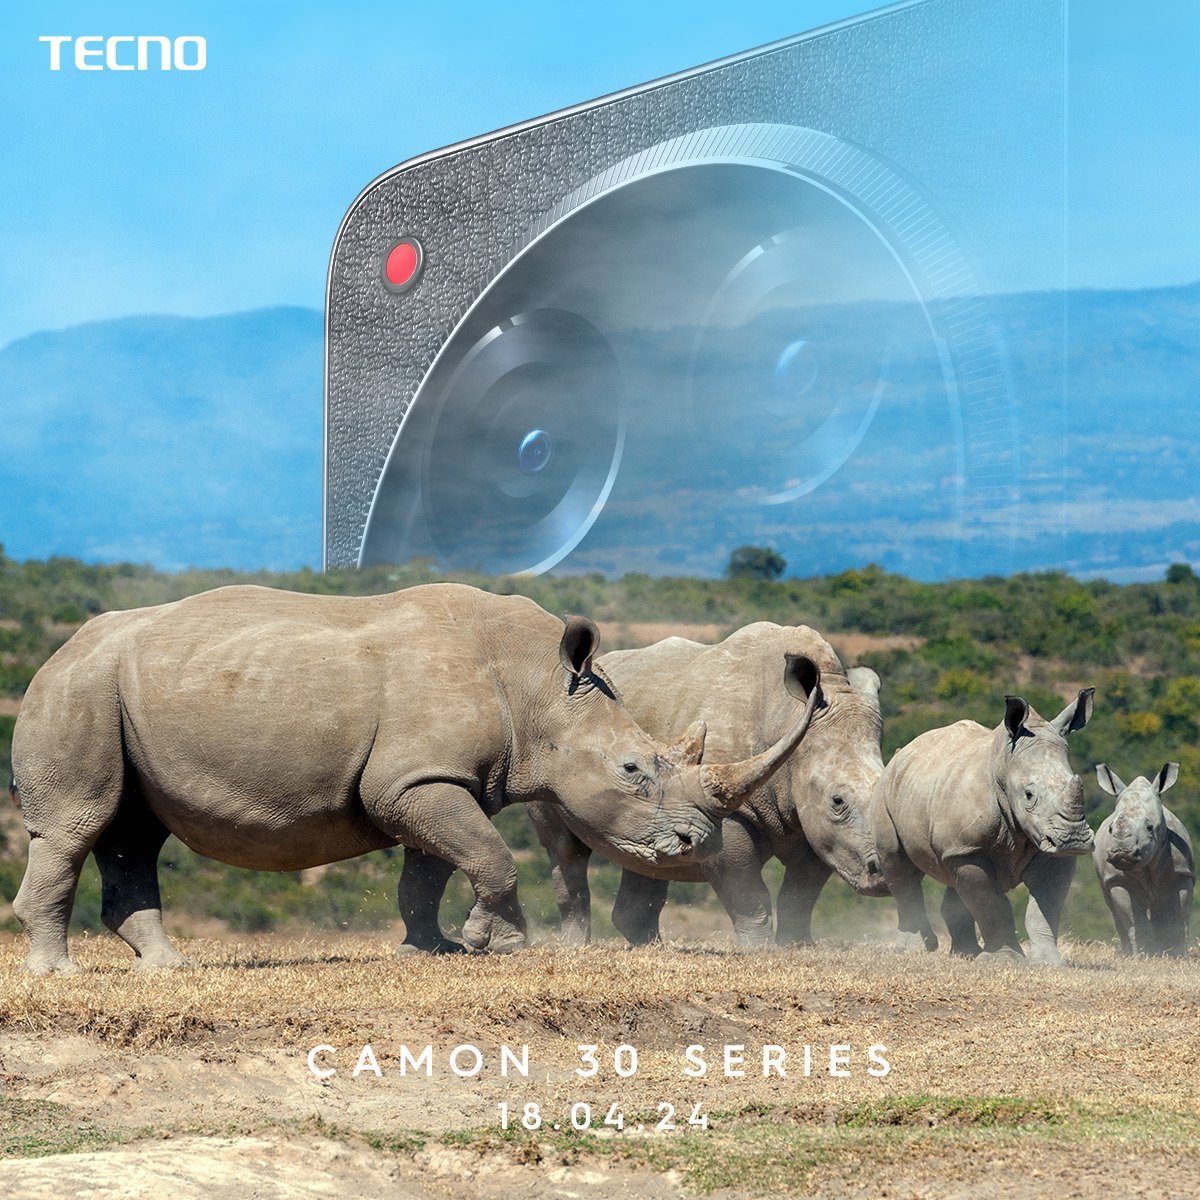 Experience the future of mobile photography with the Tecno Camon 30. From dawn till dusk, seize every opportunity to capture the beauty of life with unmatched clarity and brilliance.#TechGoesWild Camon 30KE